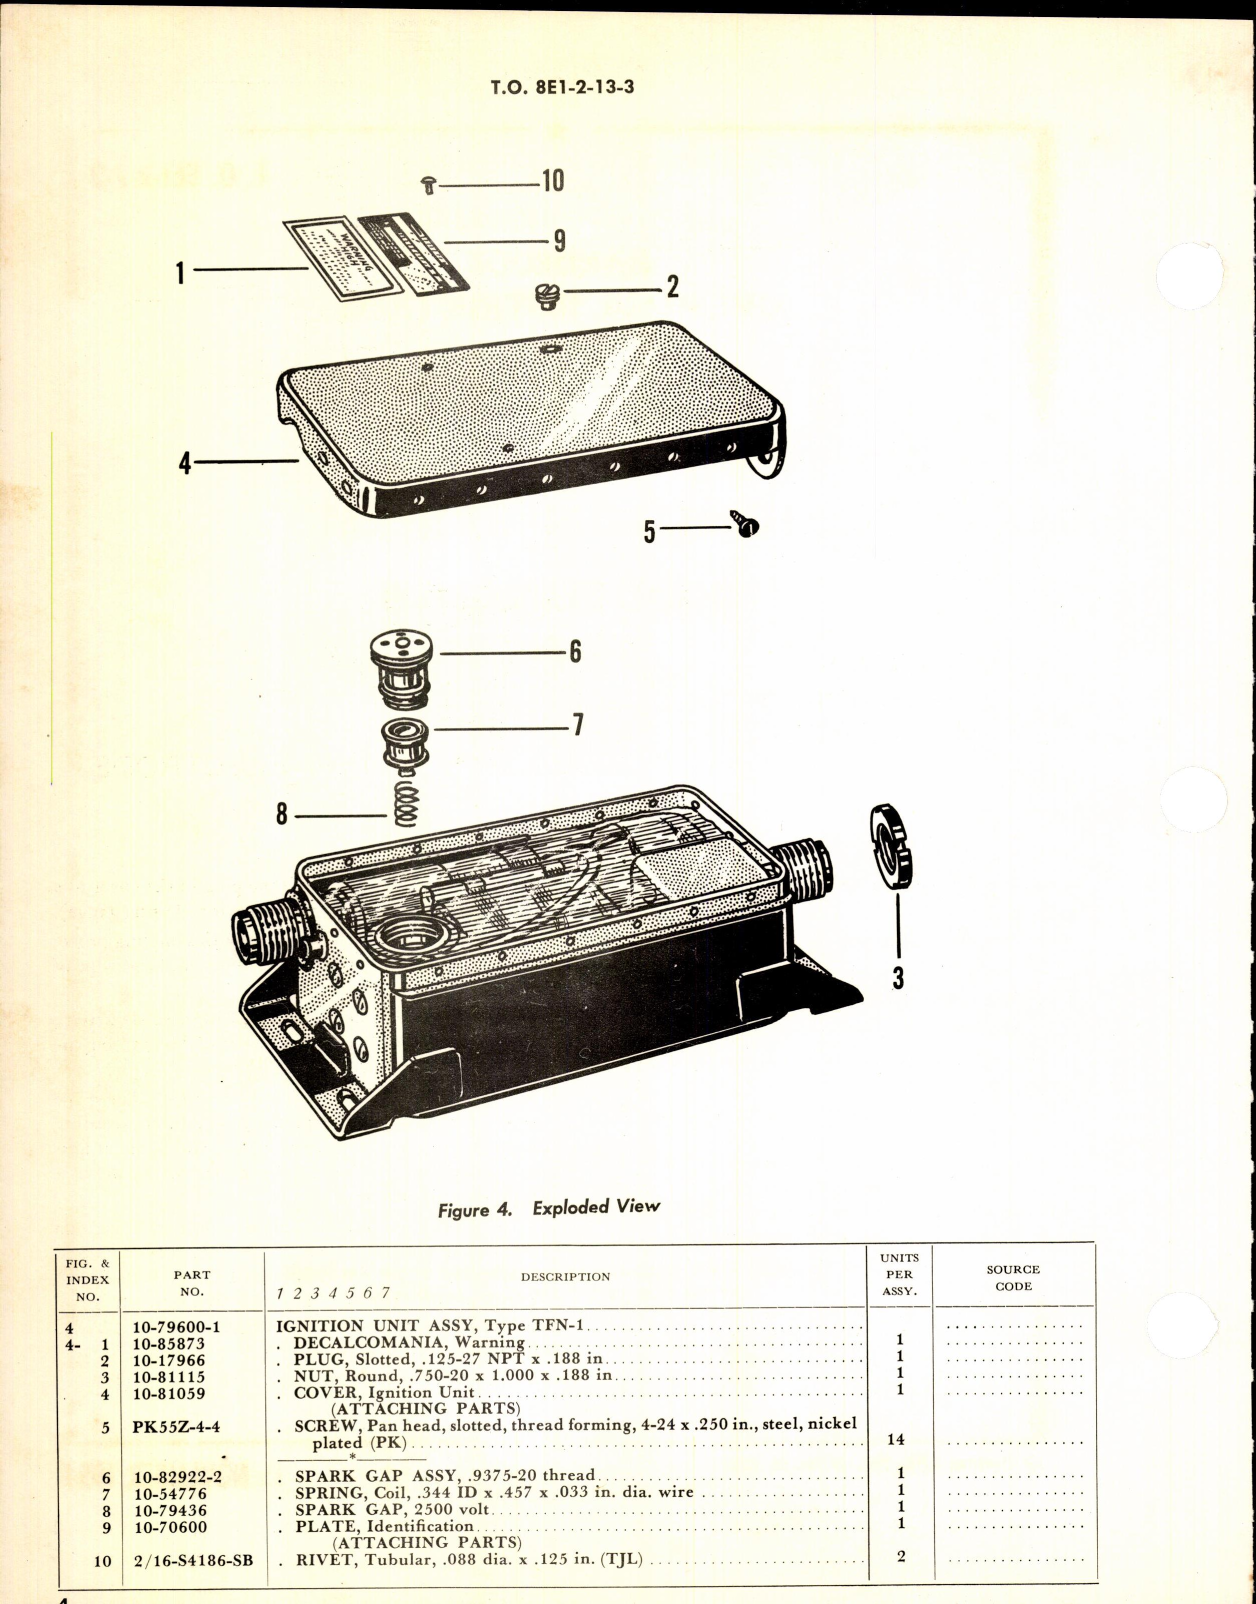 Sample page 4 from AirCorps Library document: Instructions w Parts Breakdown for TFN-1 Ignition System